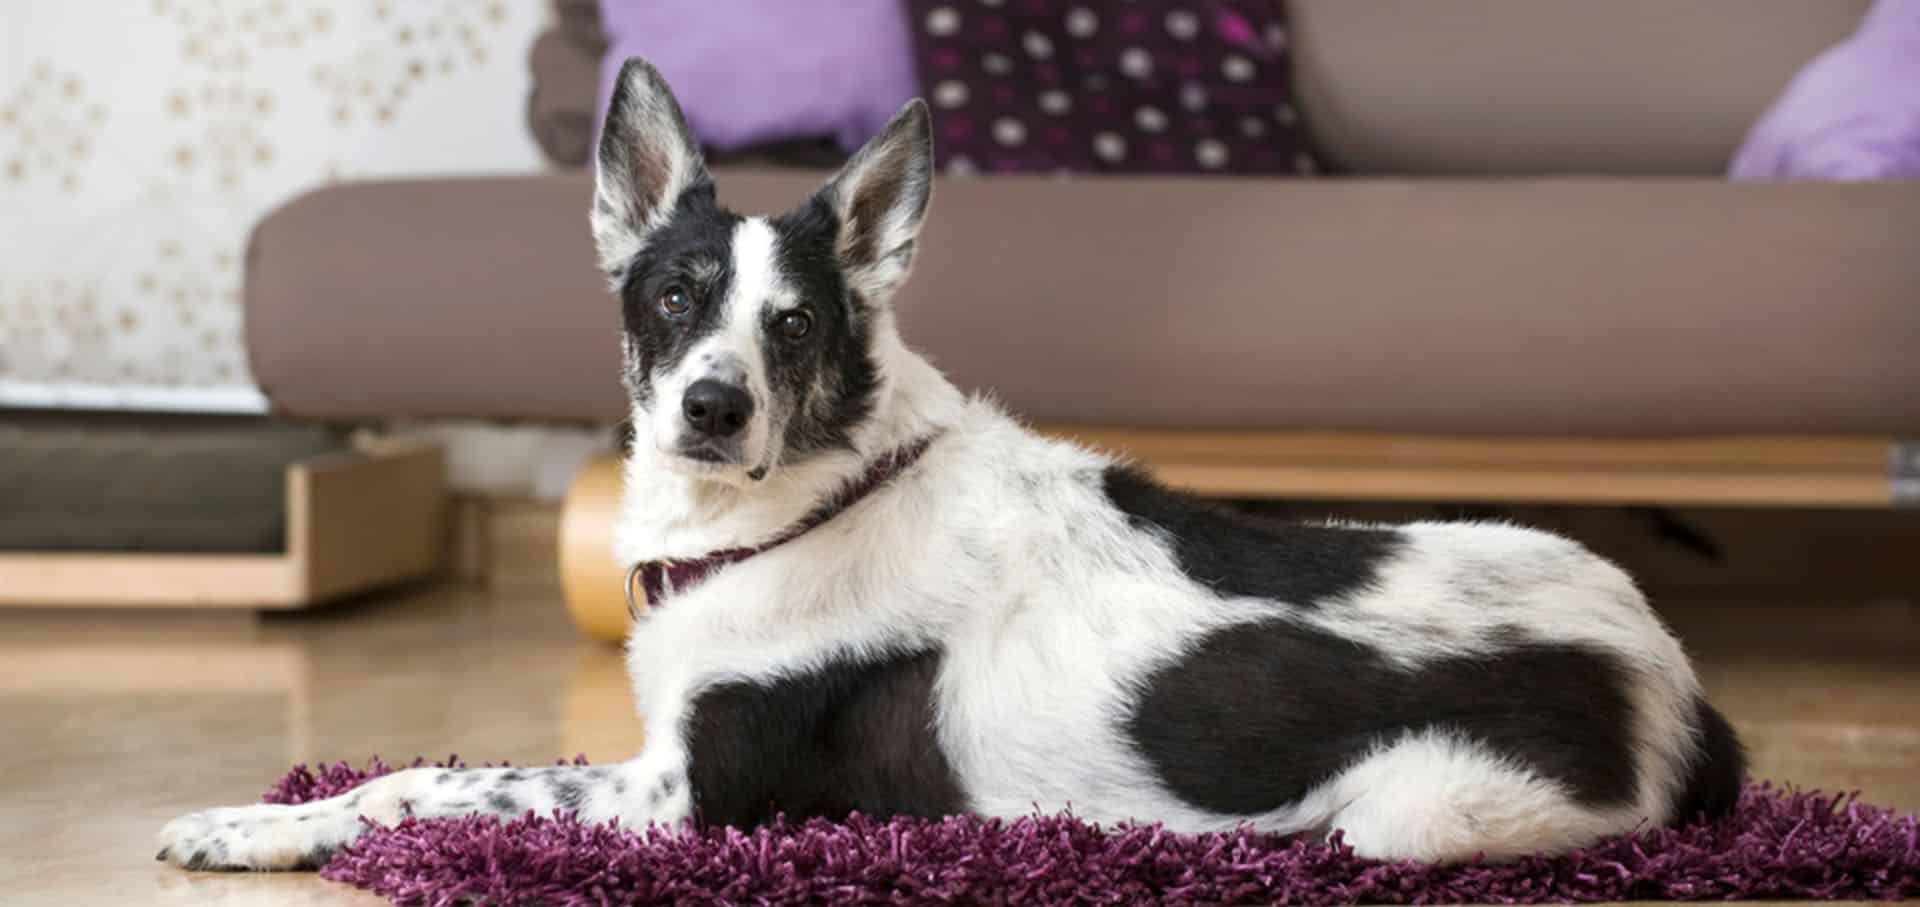 Black and white dog lying in the living room — Best Veterinary Services in Bundaberg, QLD